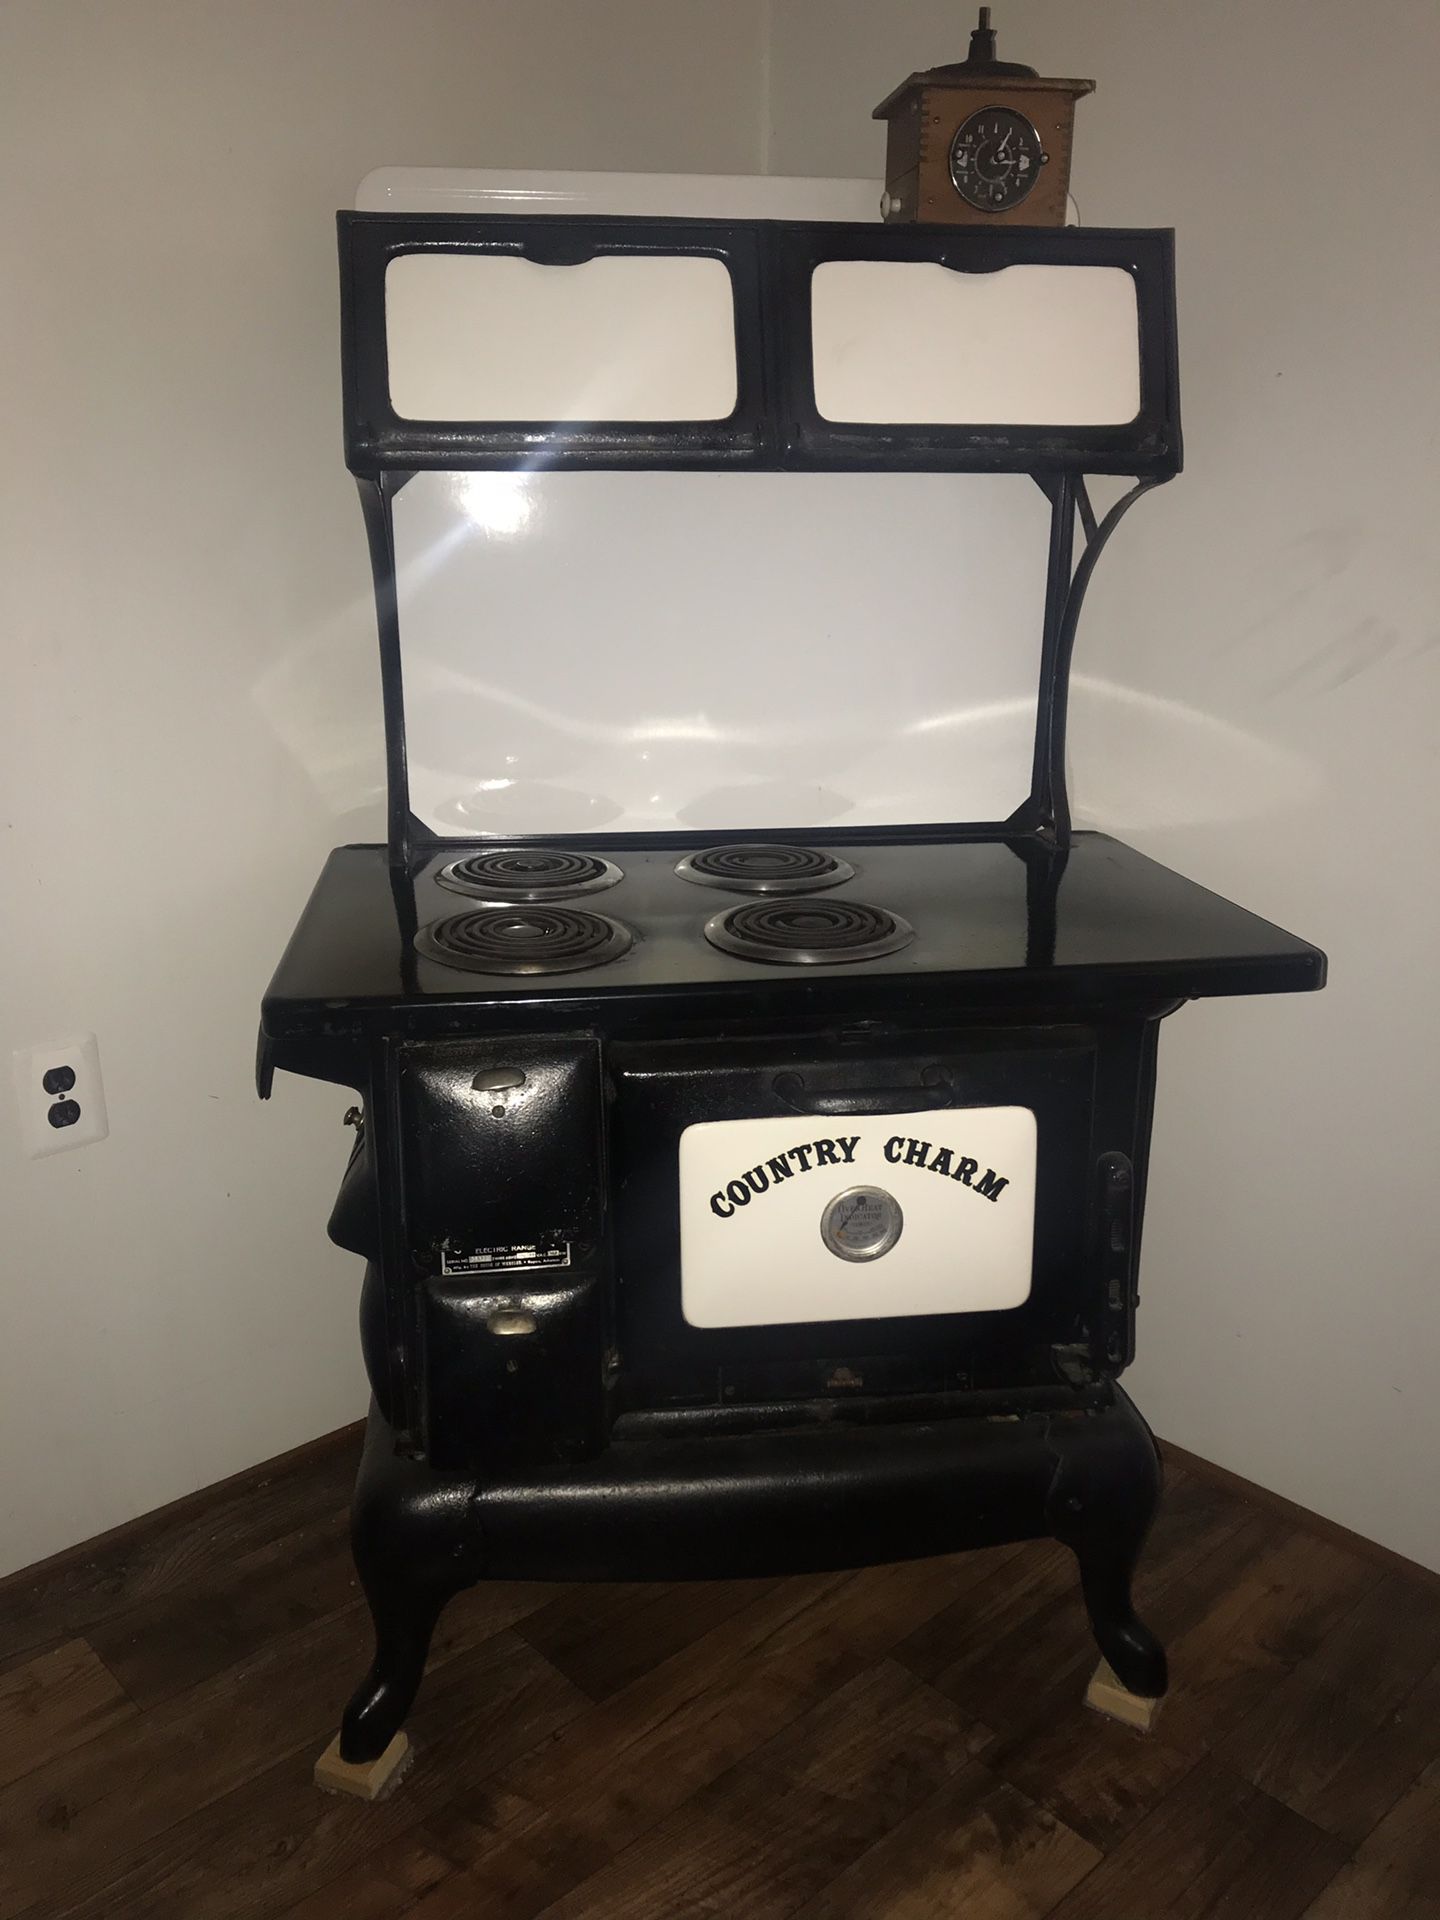 Country Charm cast iron electric stove